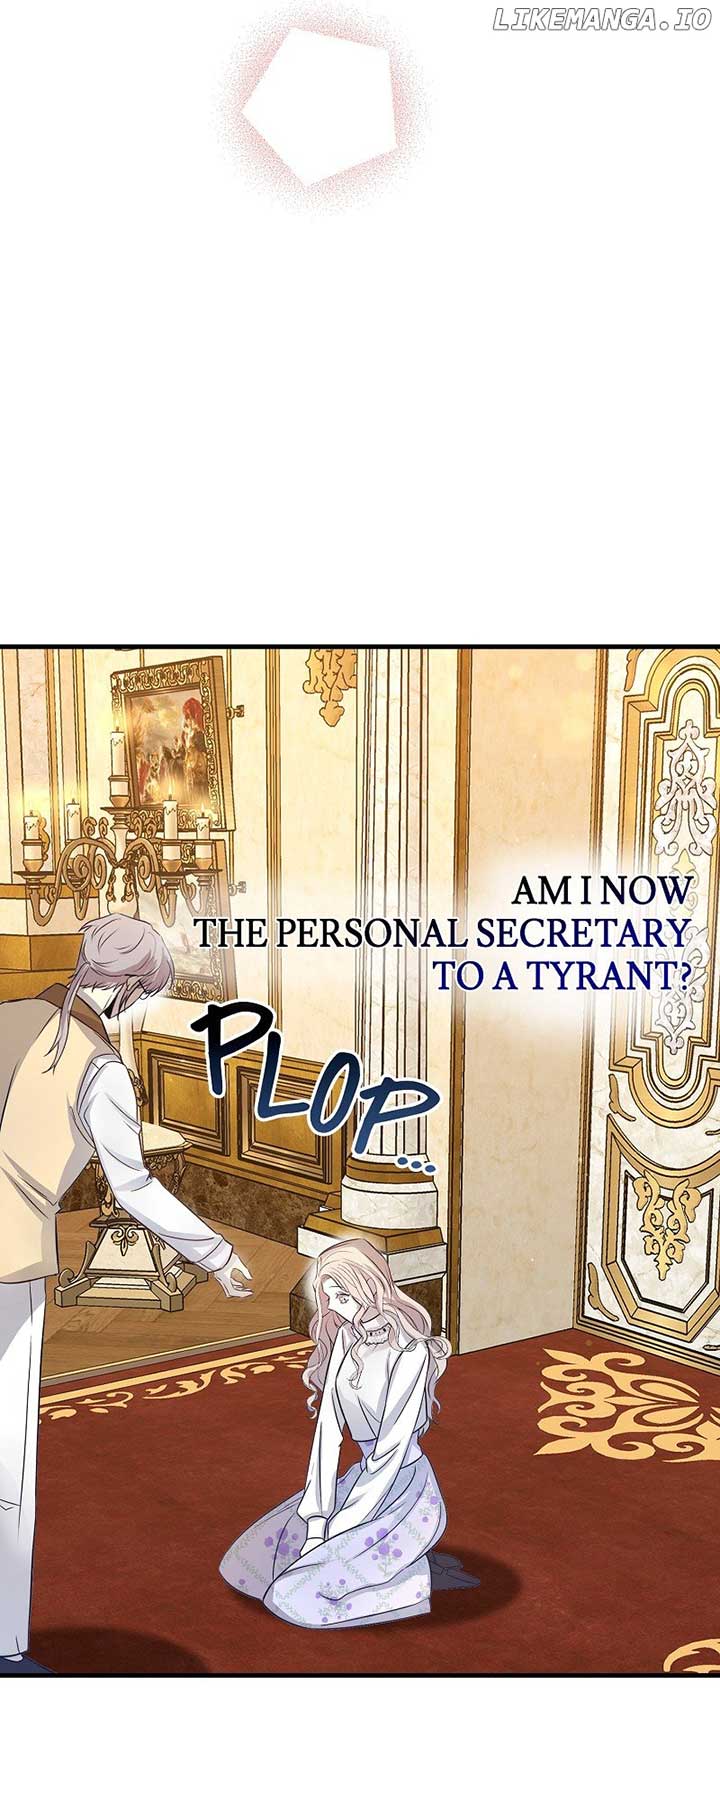 Survival of a Tyrant’s Secretary chapter 2